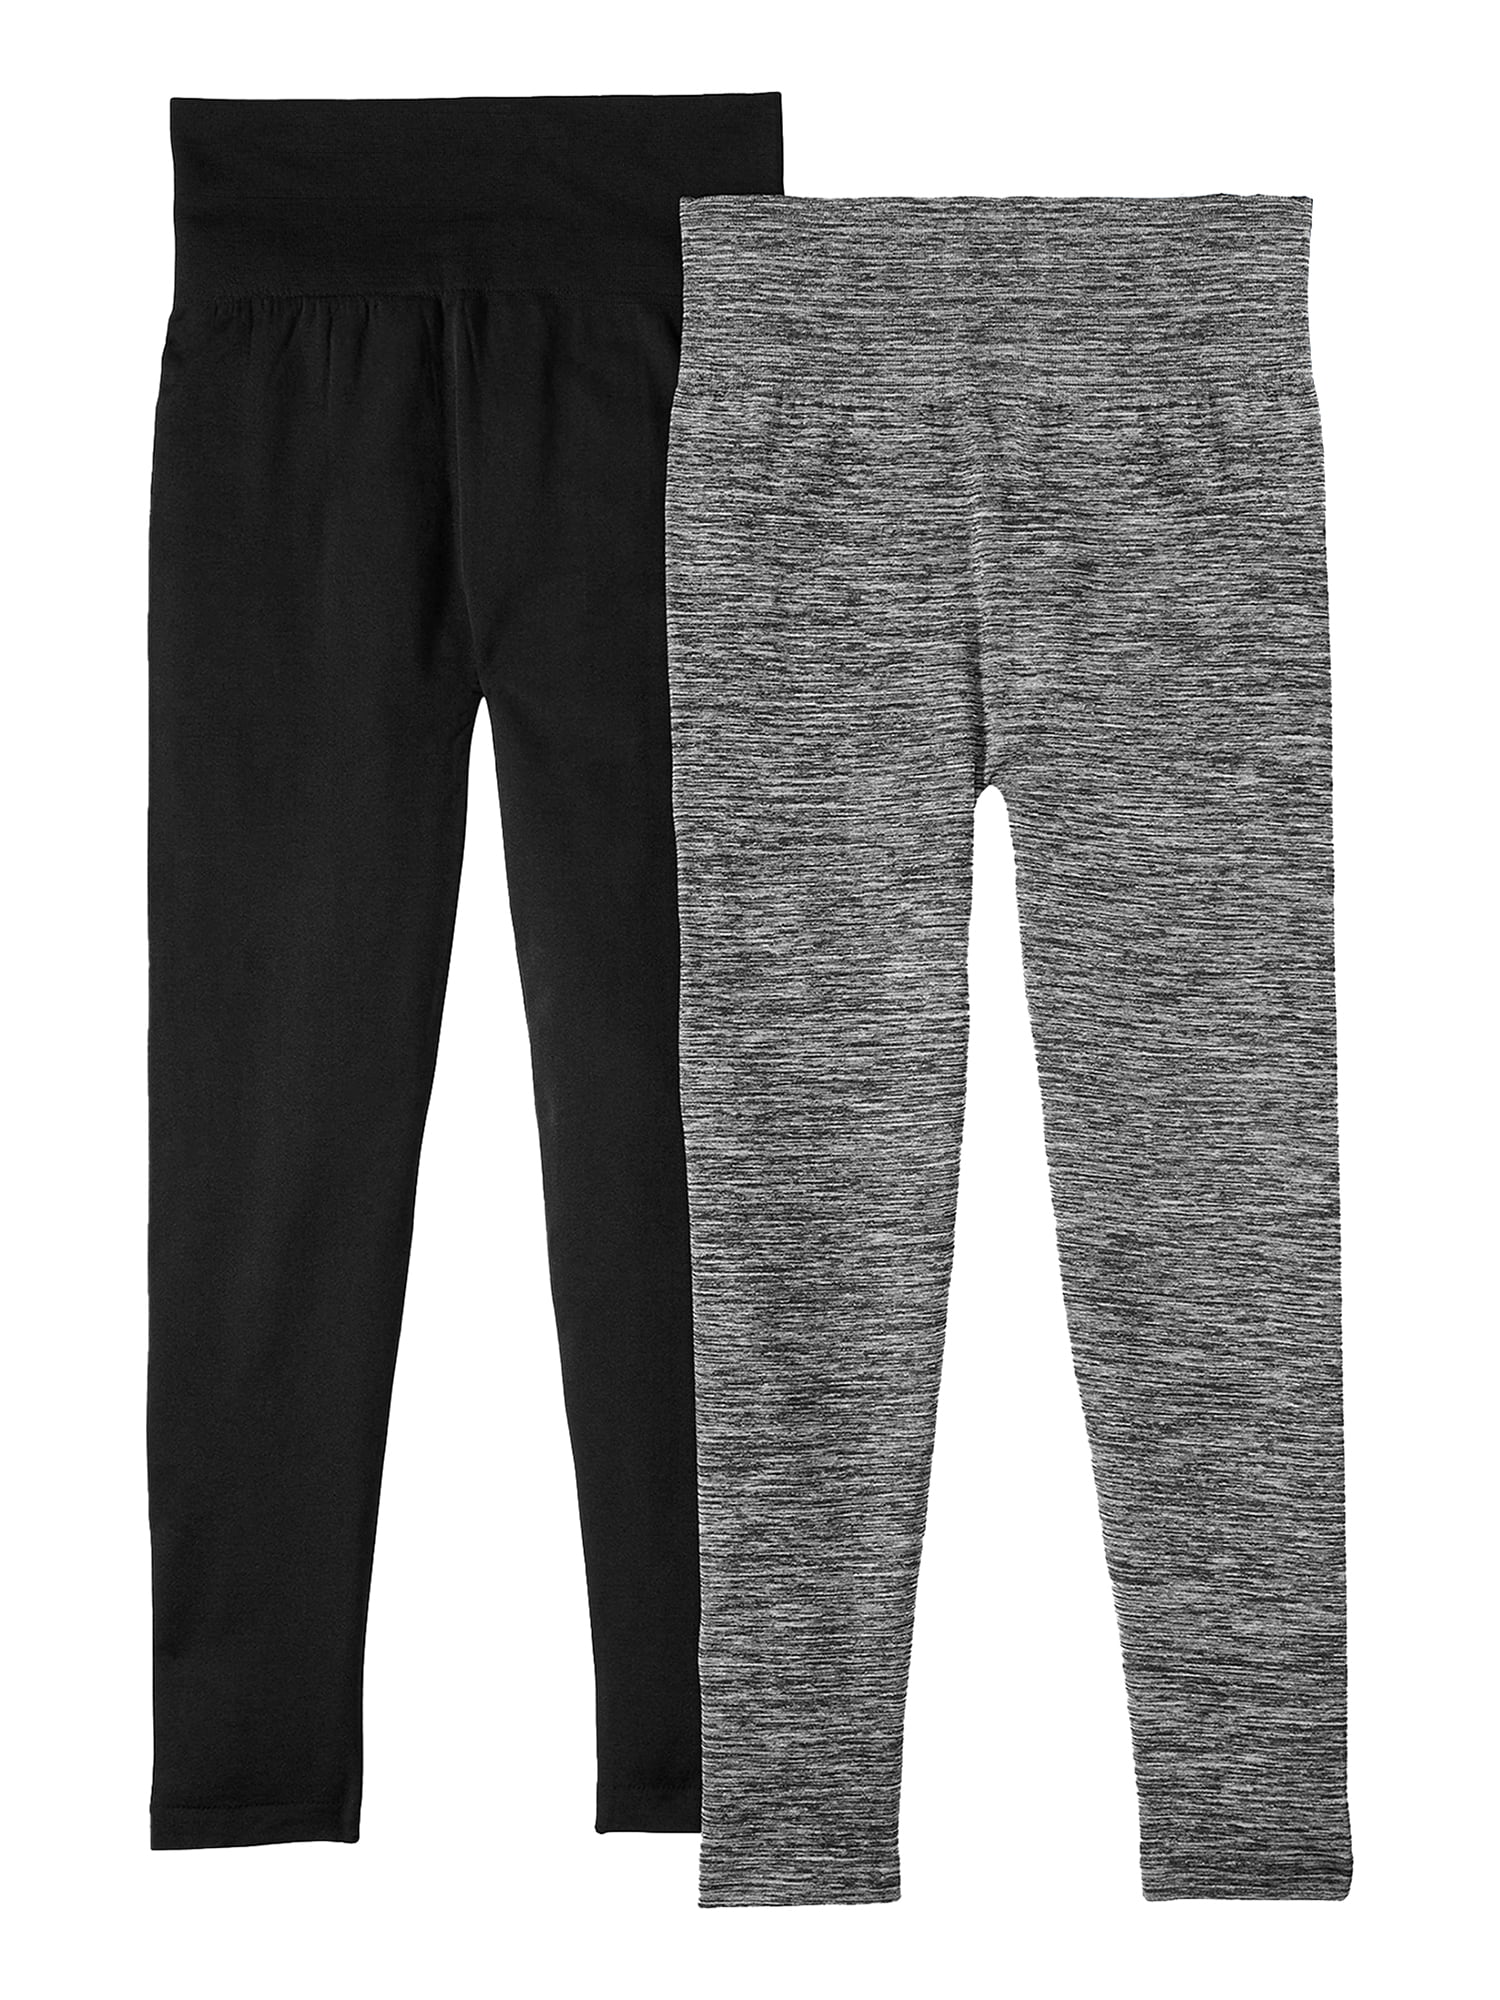 Feathers Women's & Plus Size Leggings: 2-Pack Plus High Waisted Cozy  Leggings $13, 2-Pack Women's Active Fleece Leggings $10, More + Free S&H w/  Walmart+ or on $35+ $12.99